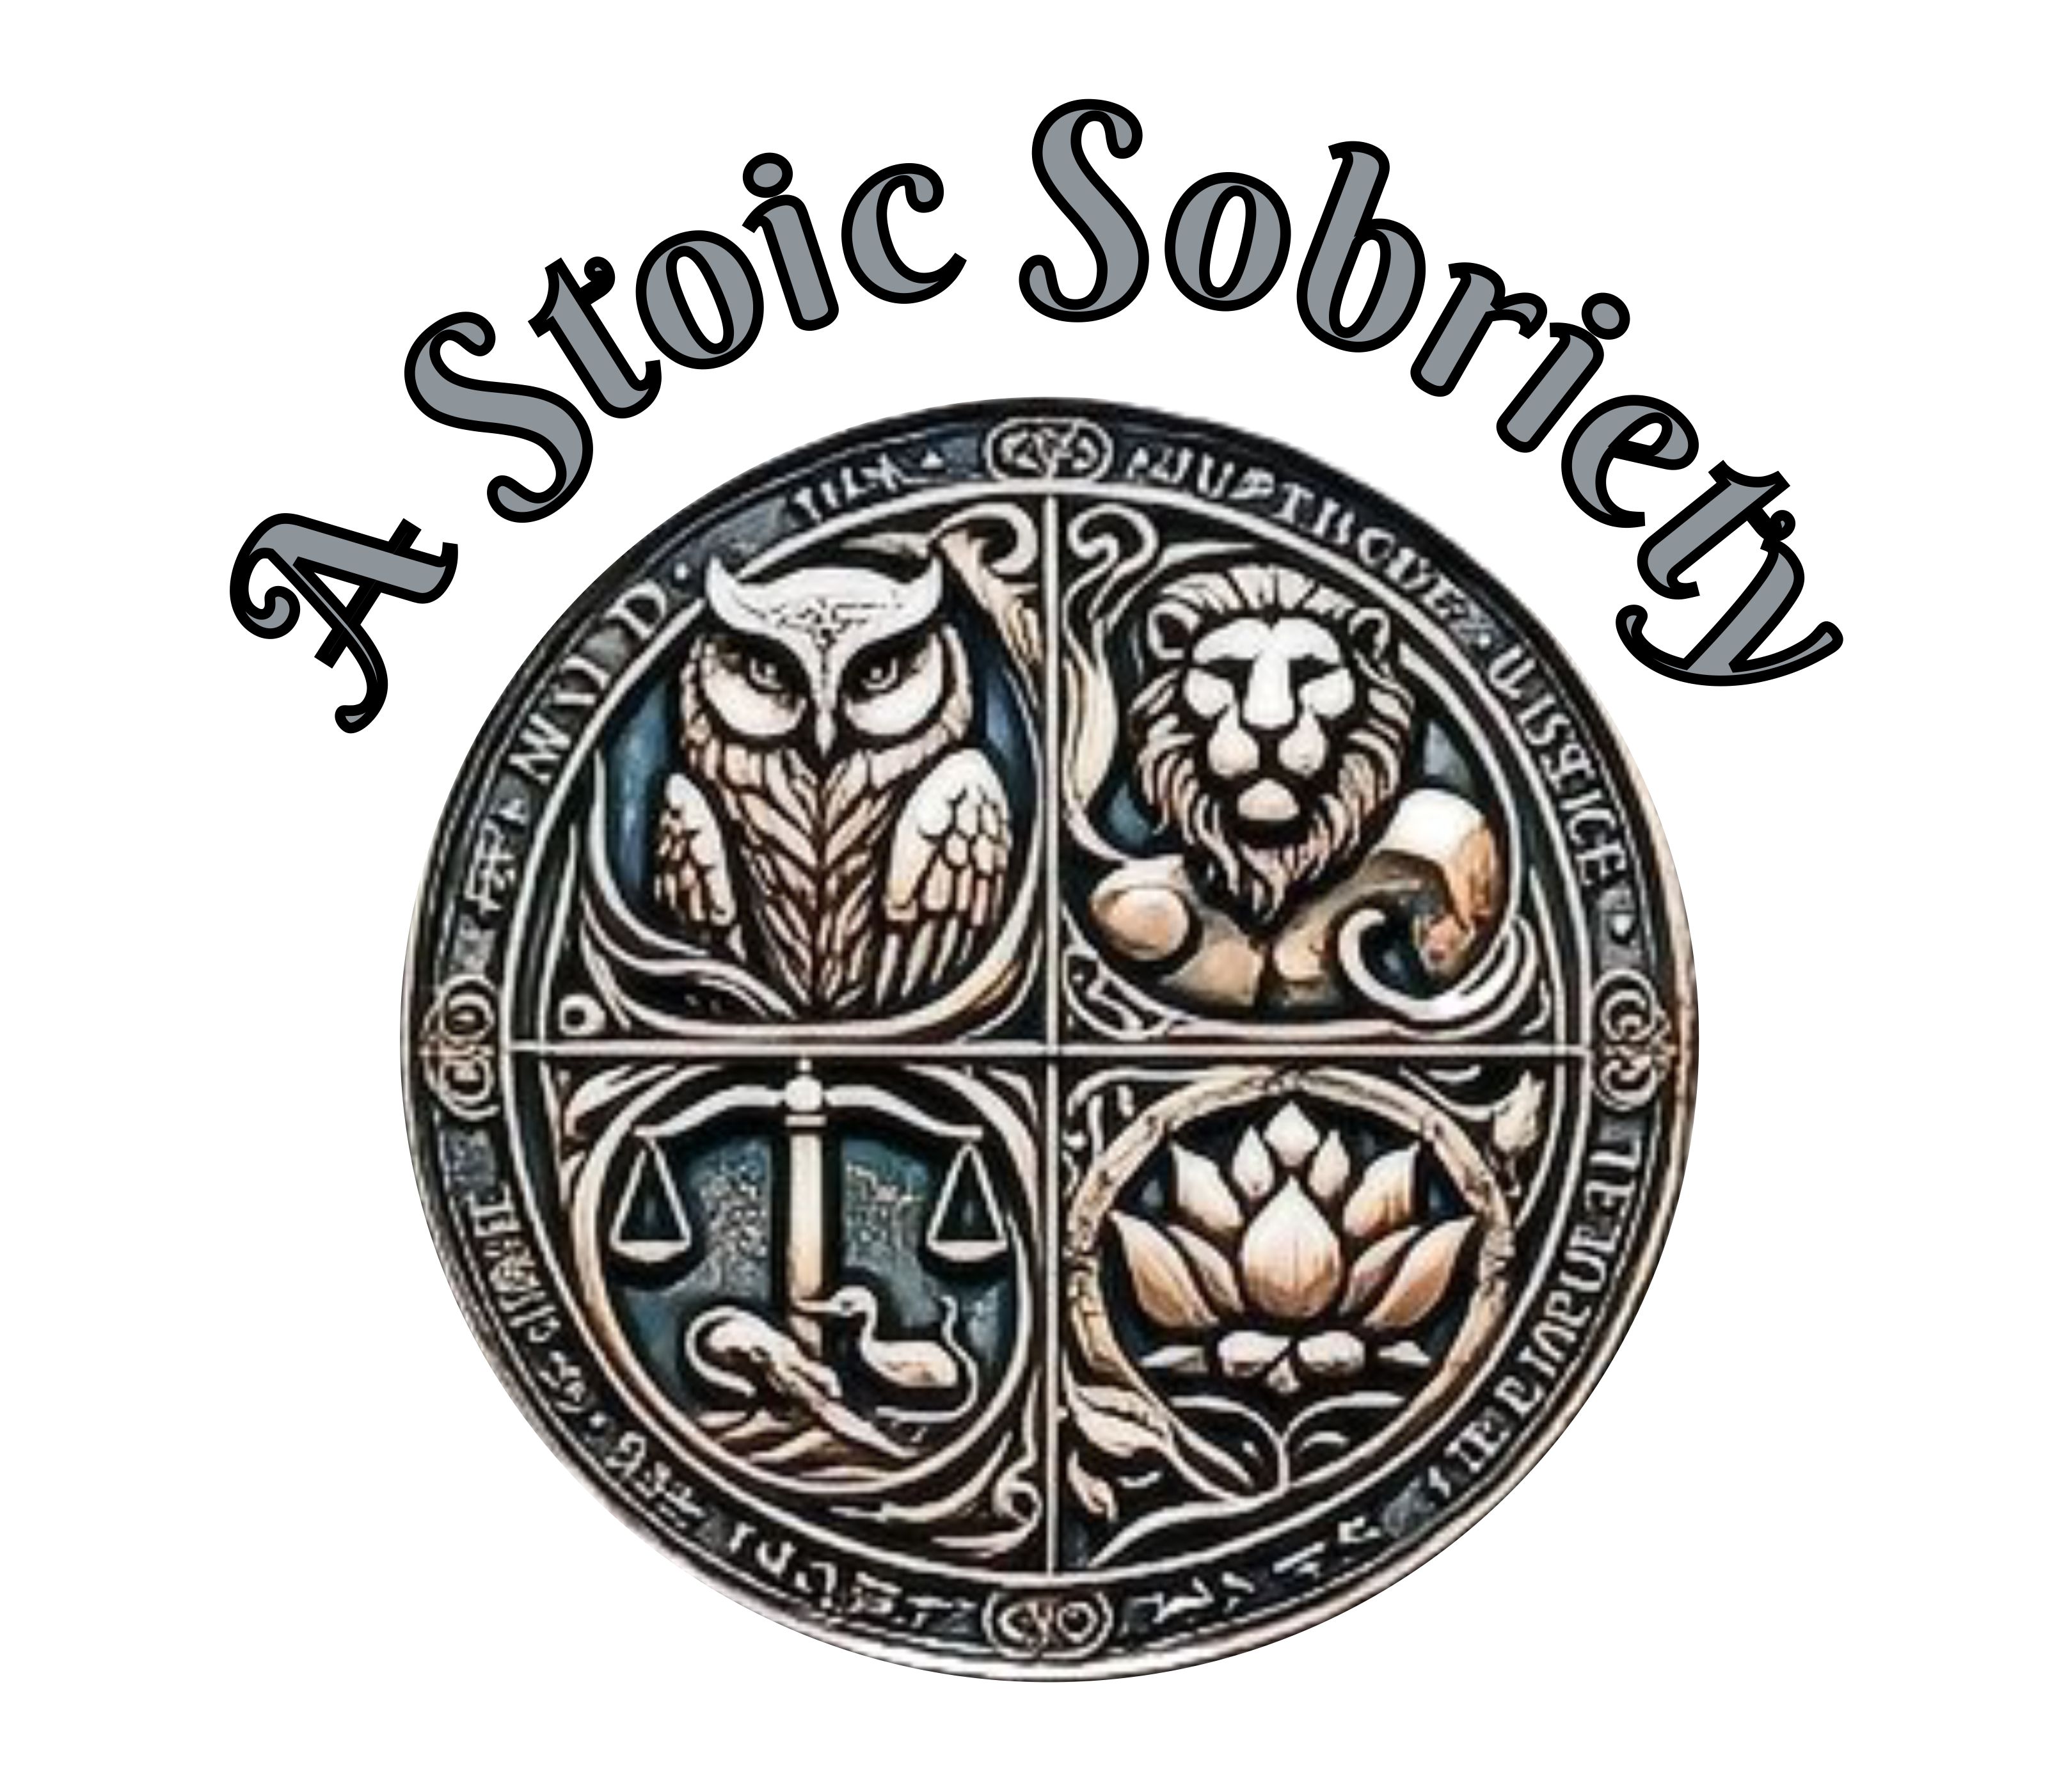 A Stoic Sobriety - Turning the Page